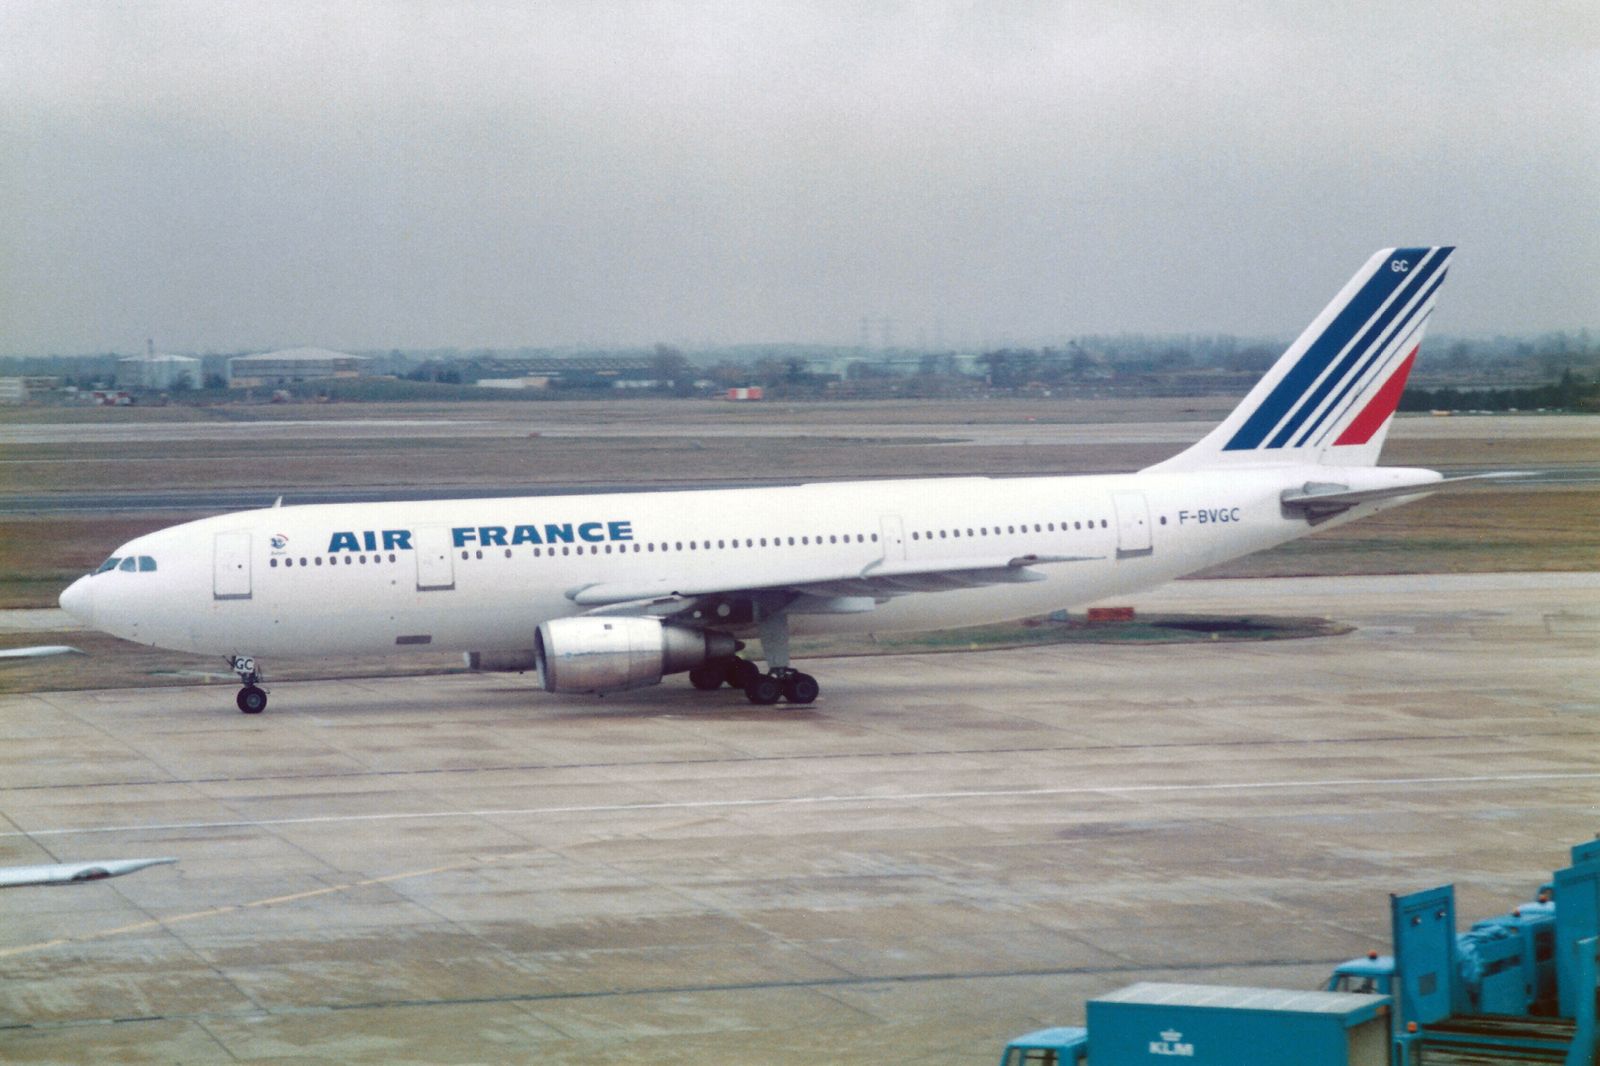 An Air France Airbus A300 taxiing to the runway.